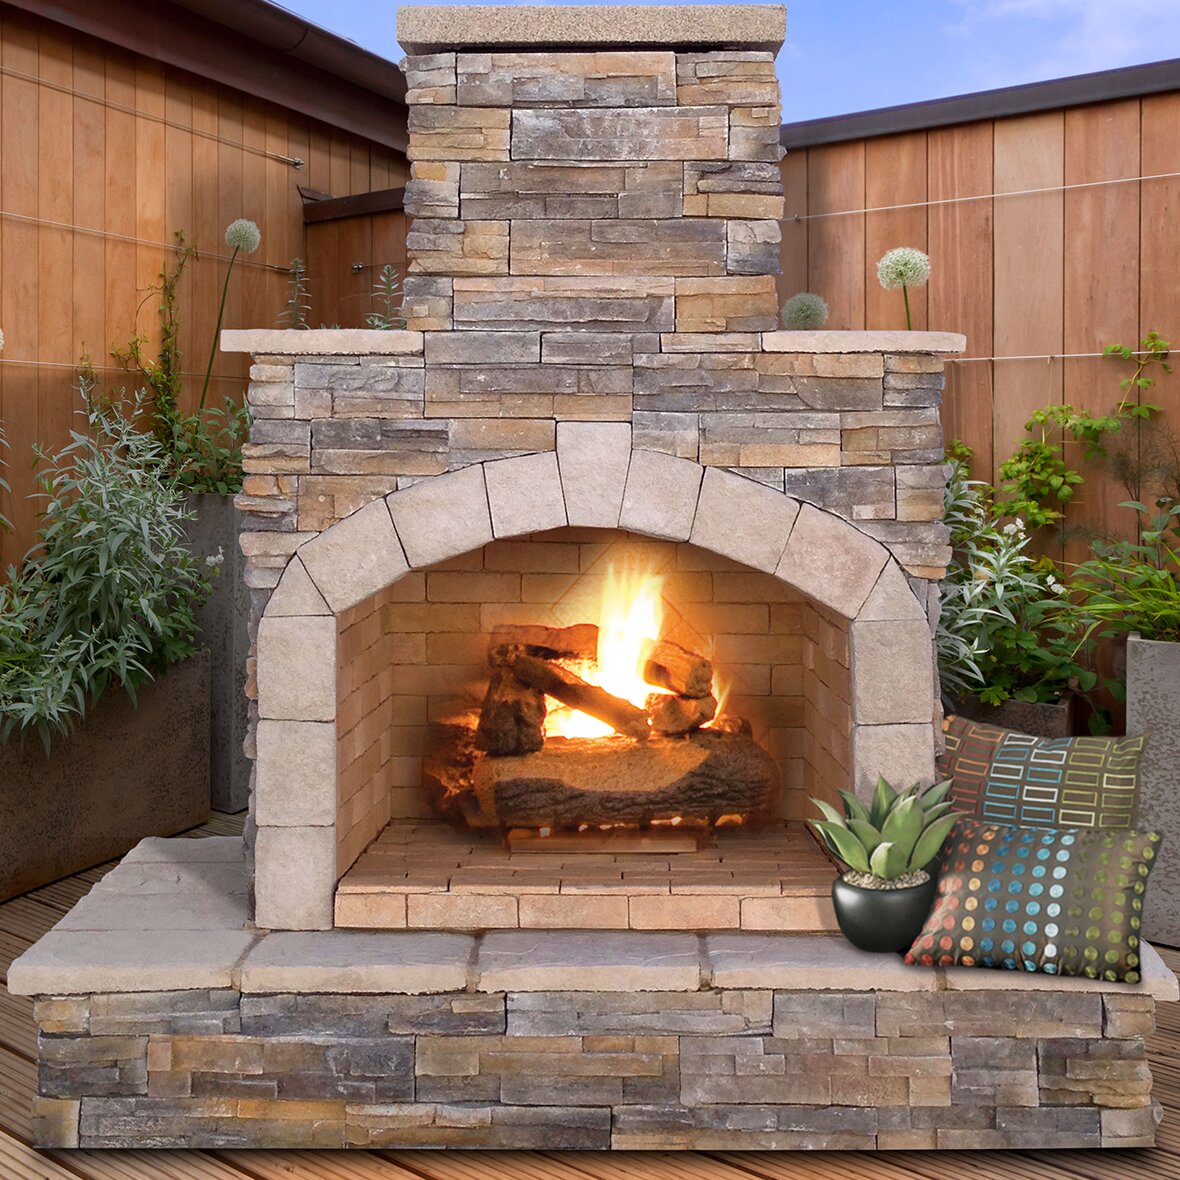 CalFlame Natural Stone Propane / Gas Outdoor Fireplace ...